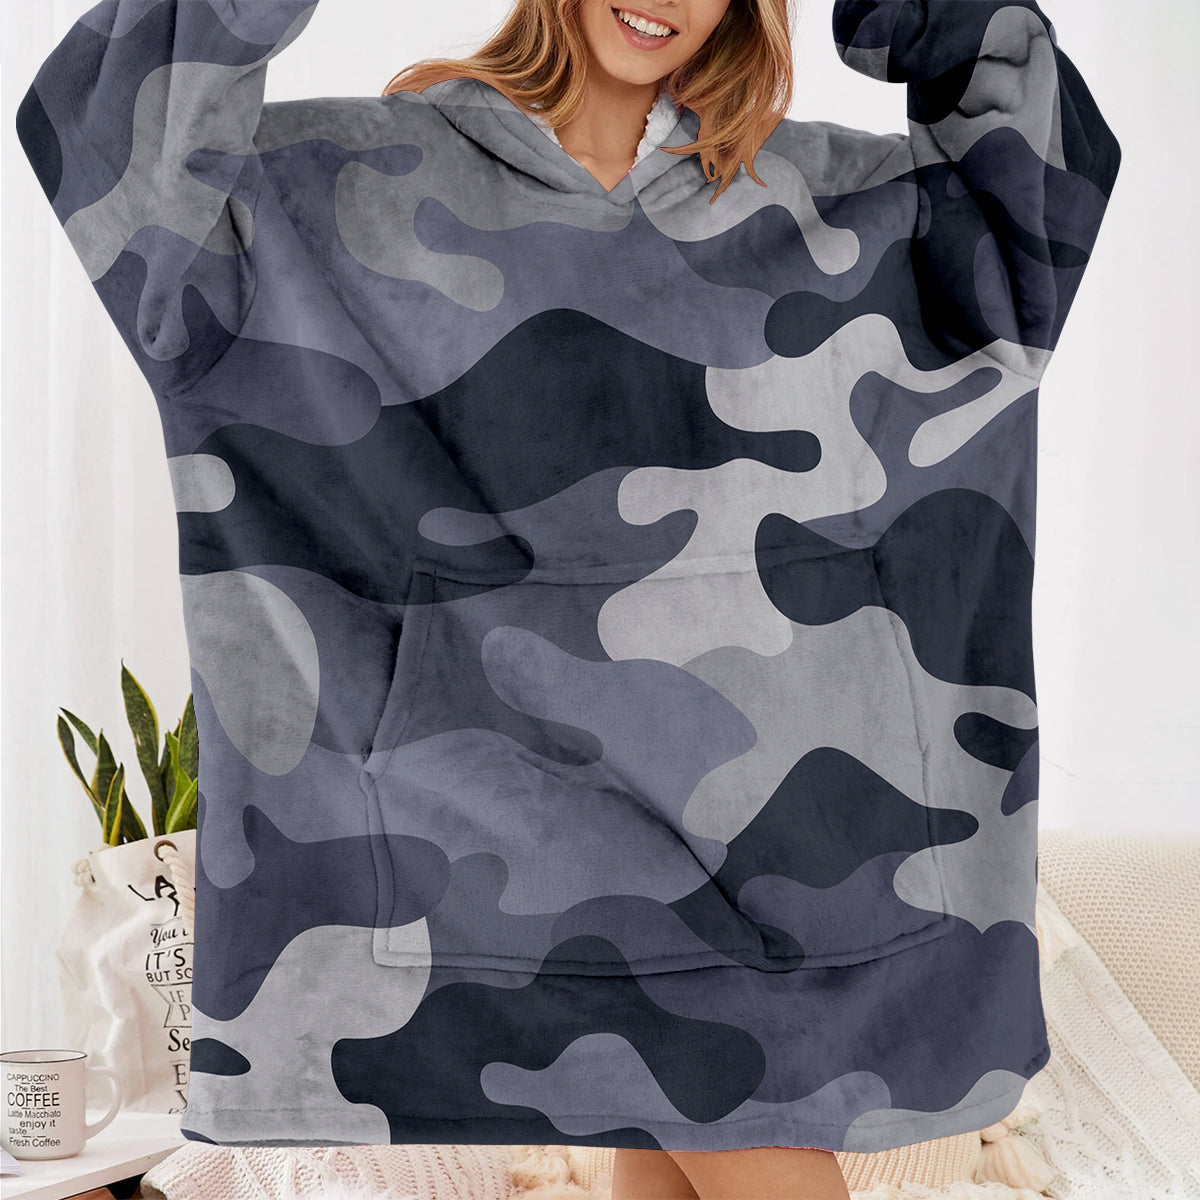 Military Camouflage Army Gray Designed Blanket Hoodies